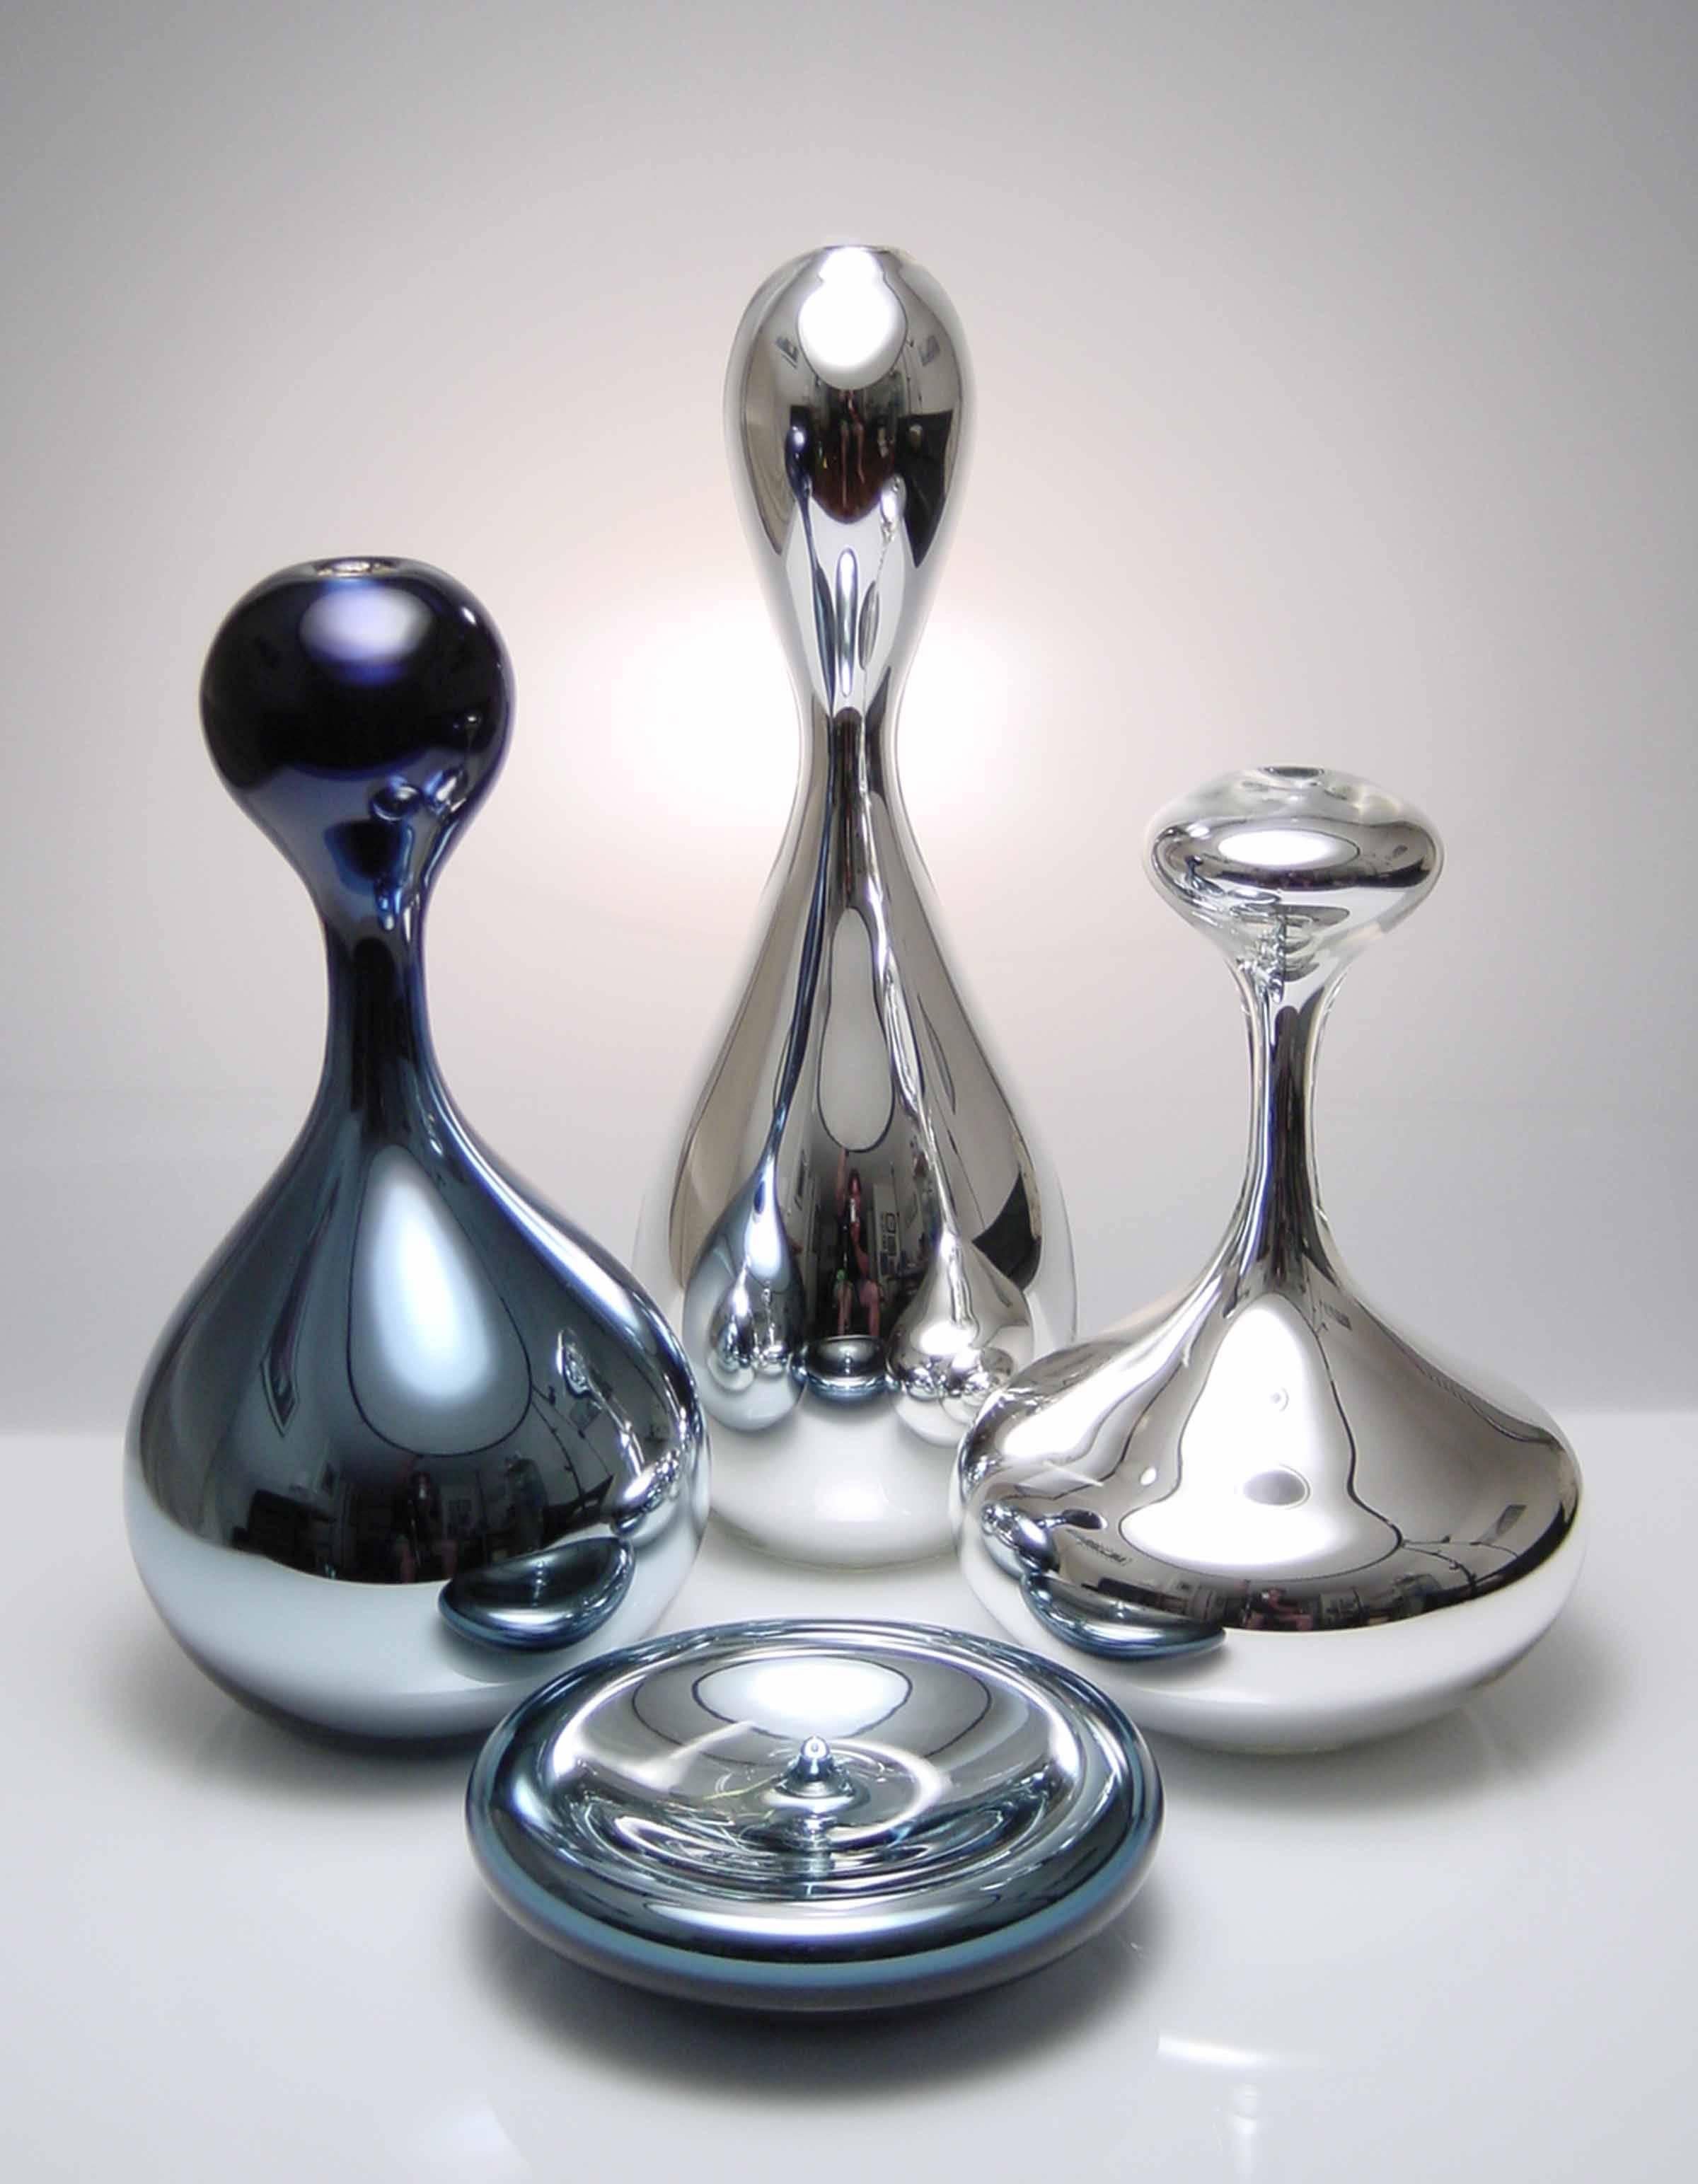 The Mercury Series is comprised of blown glass vessels with a mirrored interior. Meant to mimic the different stages of a drop of mercury separating, the set of handmade vessels is comprised of four pieces of varying colors and bubble